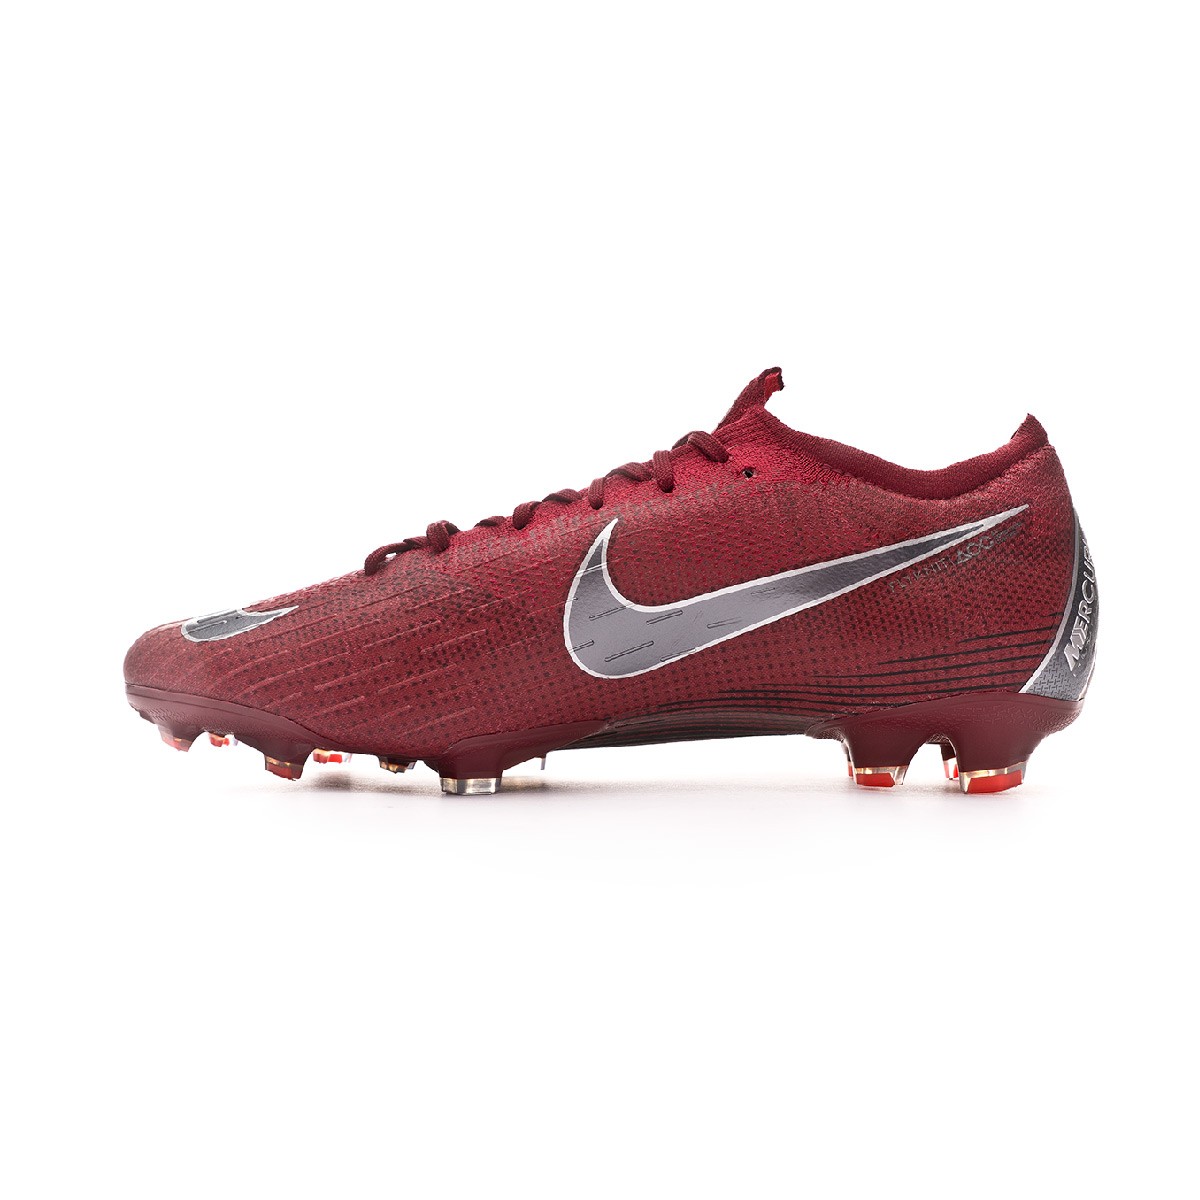 Nike Mercurial Superfly 6 Academy Football Boots Teppen.